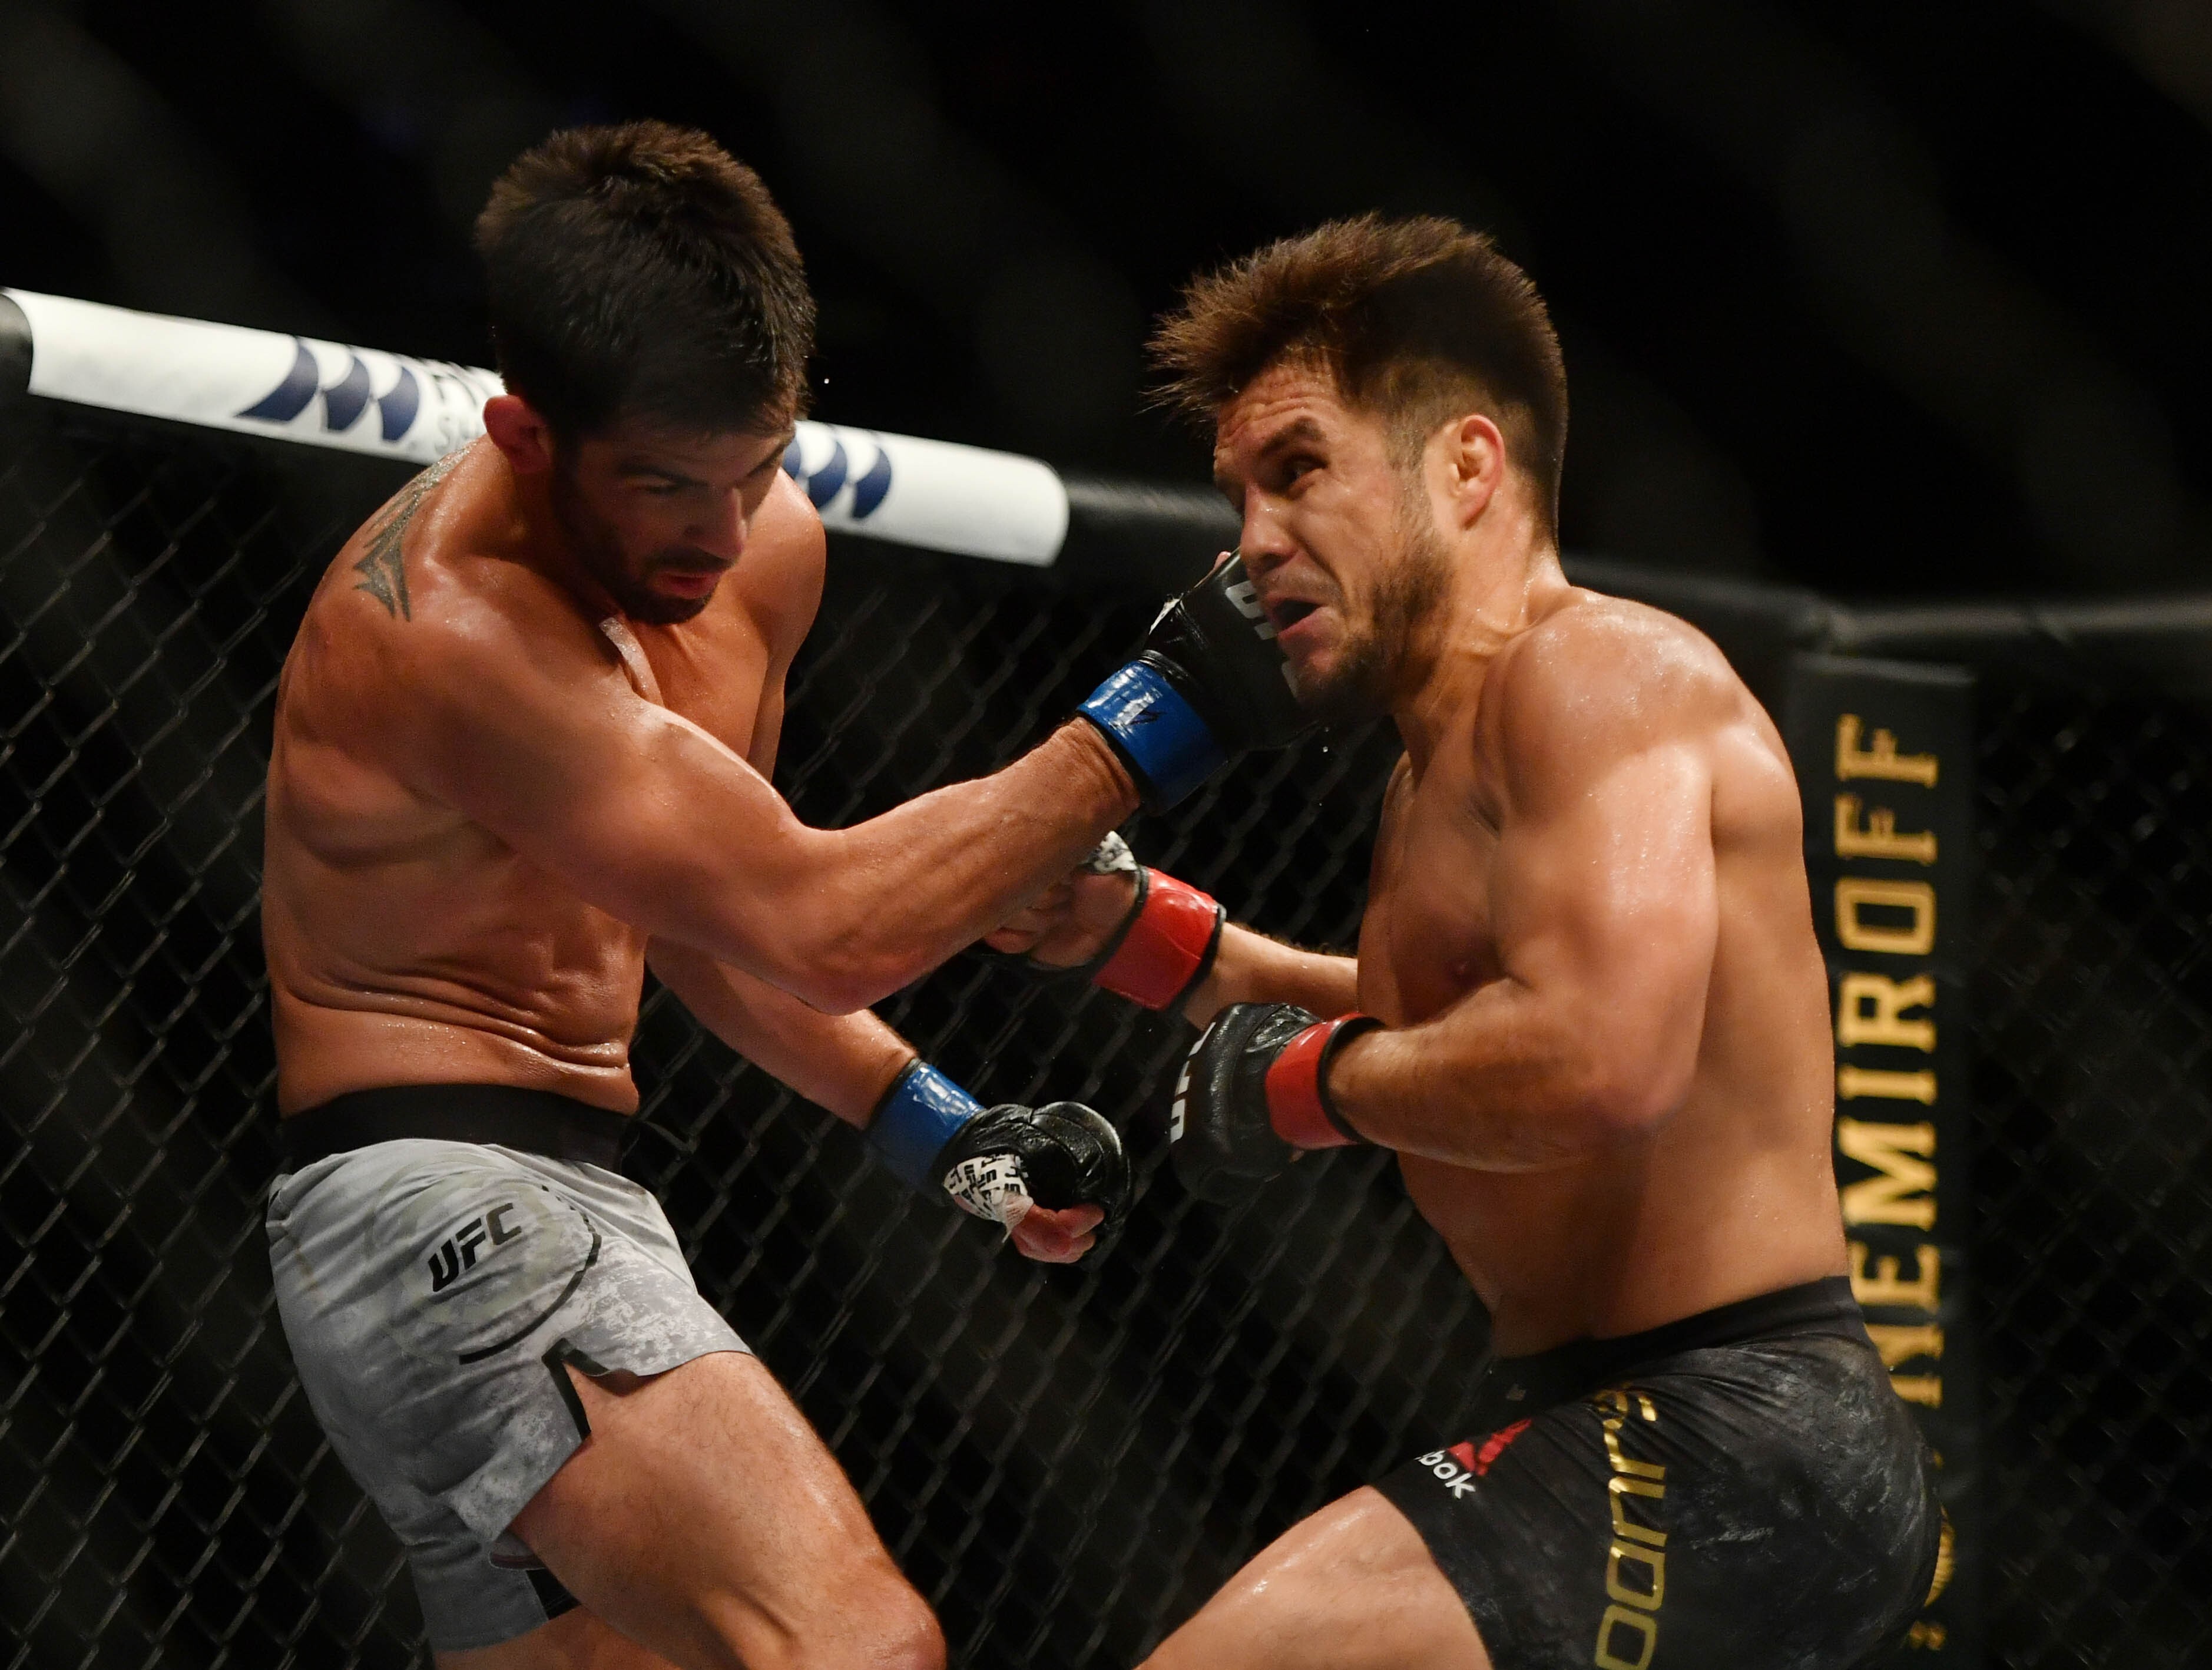 Henry Cejudo exchanges with Dominick Cruz at UFC 249. Photo: USA TODAY Sports